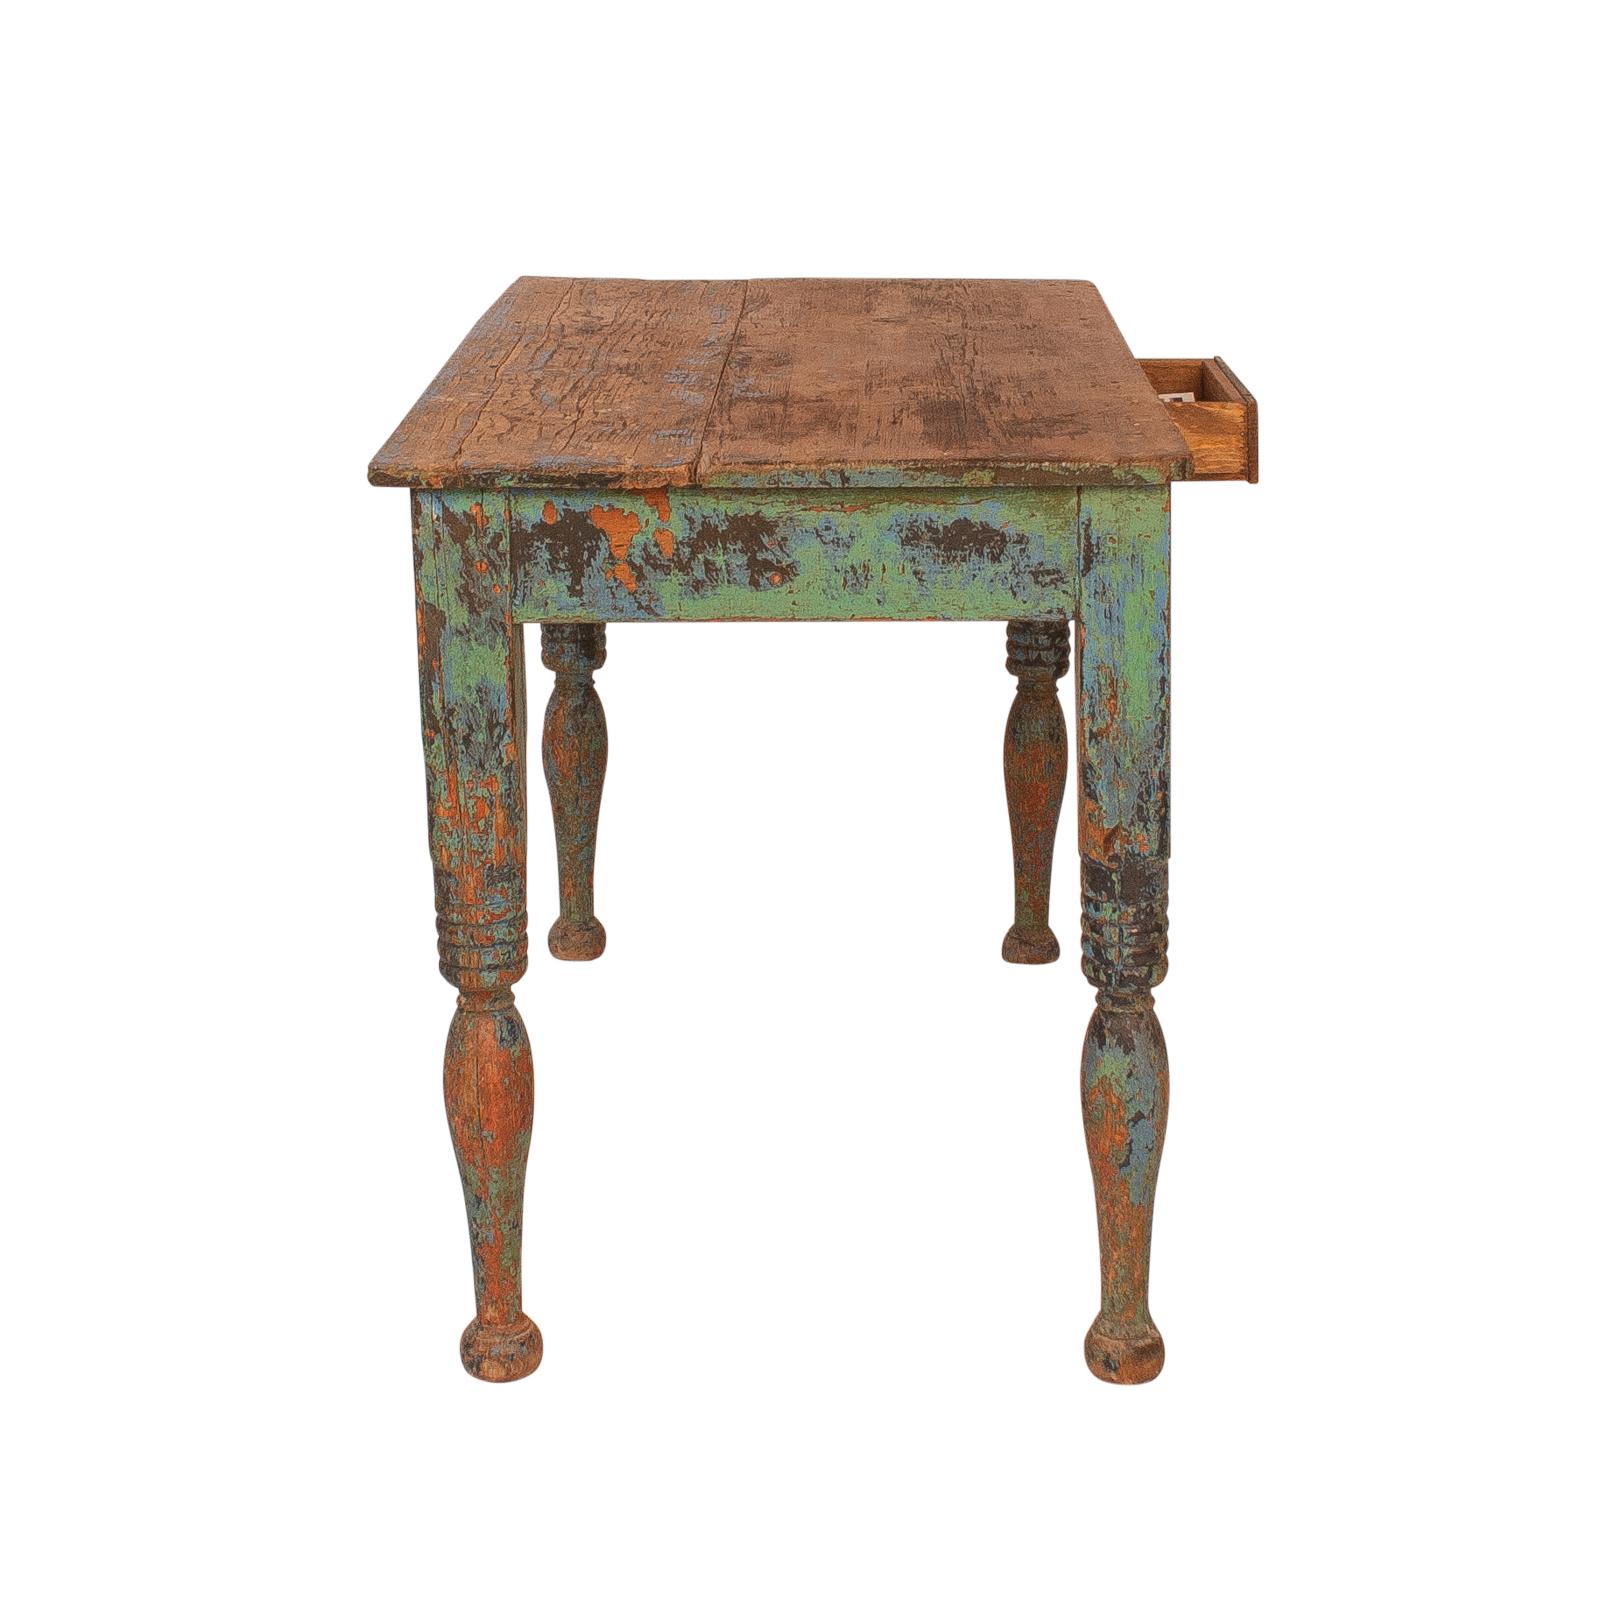 Central American Vibrant green Spanish Colonial Work Table, circa 1880